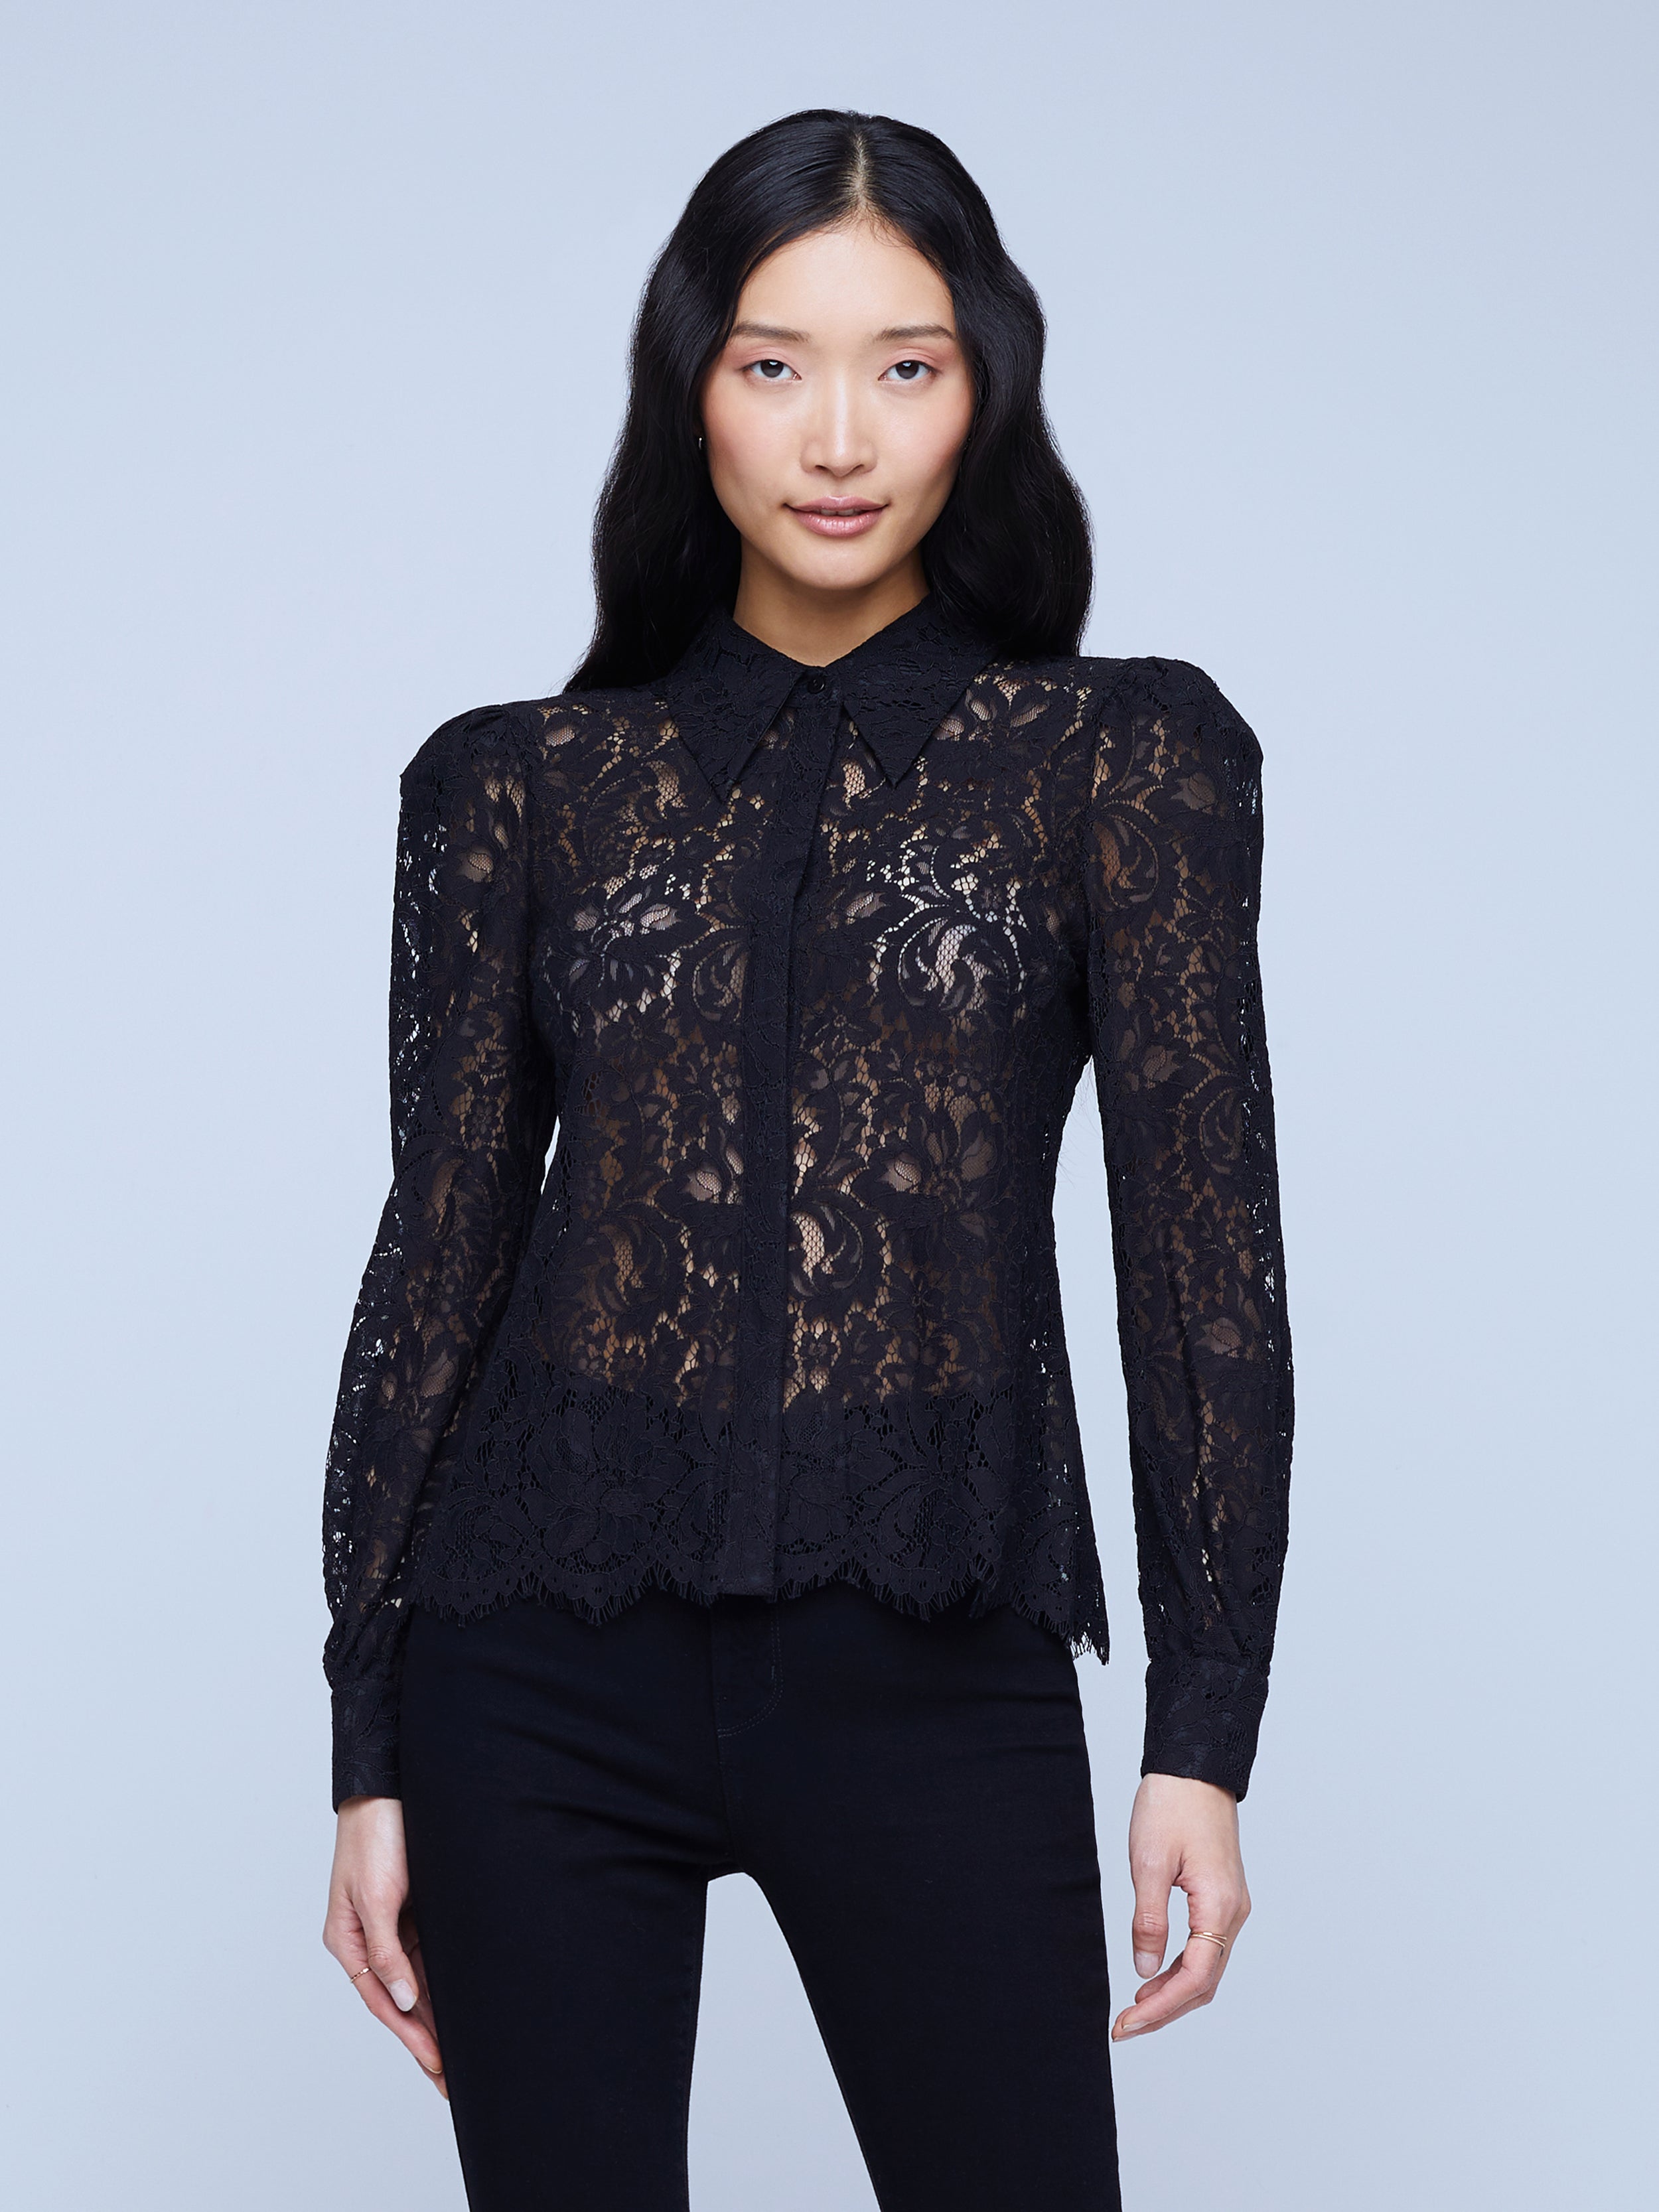 Soft Volume Lace Top In Black